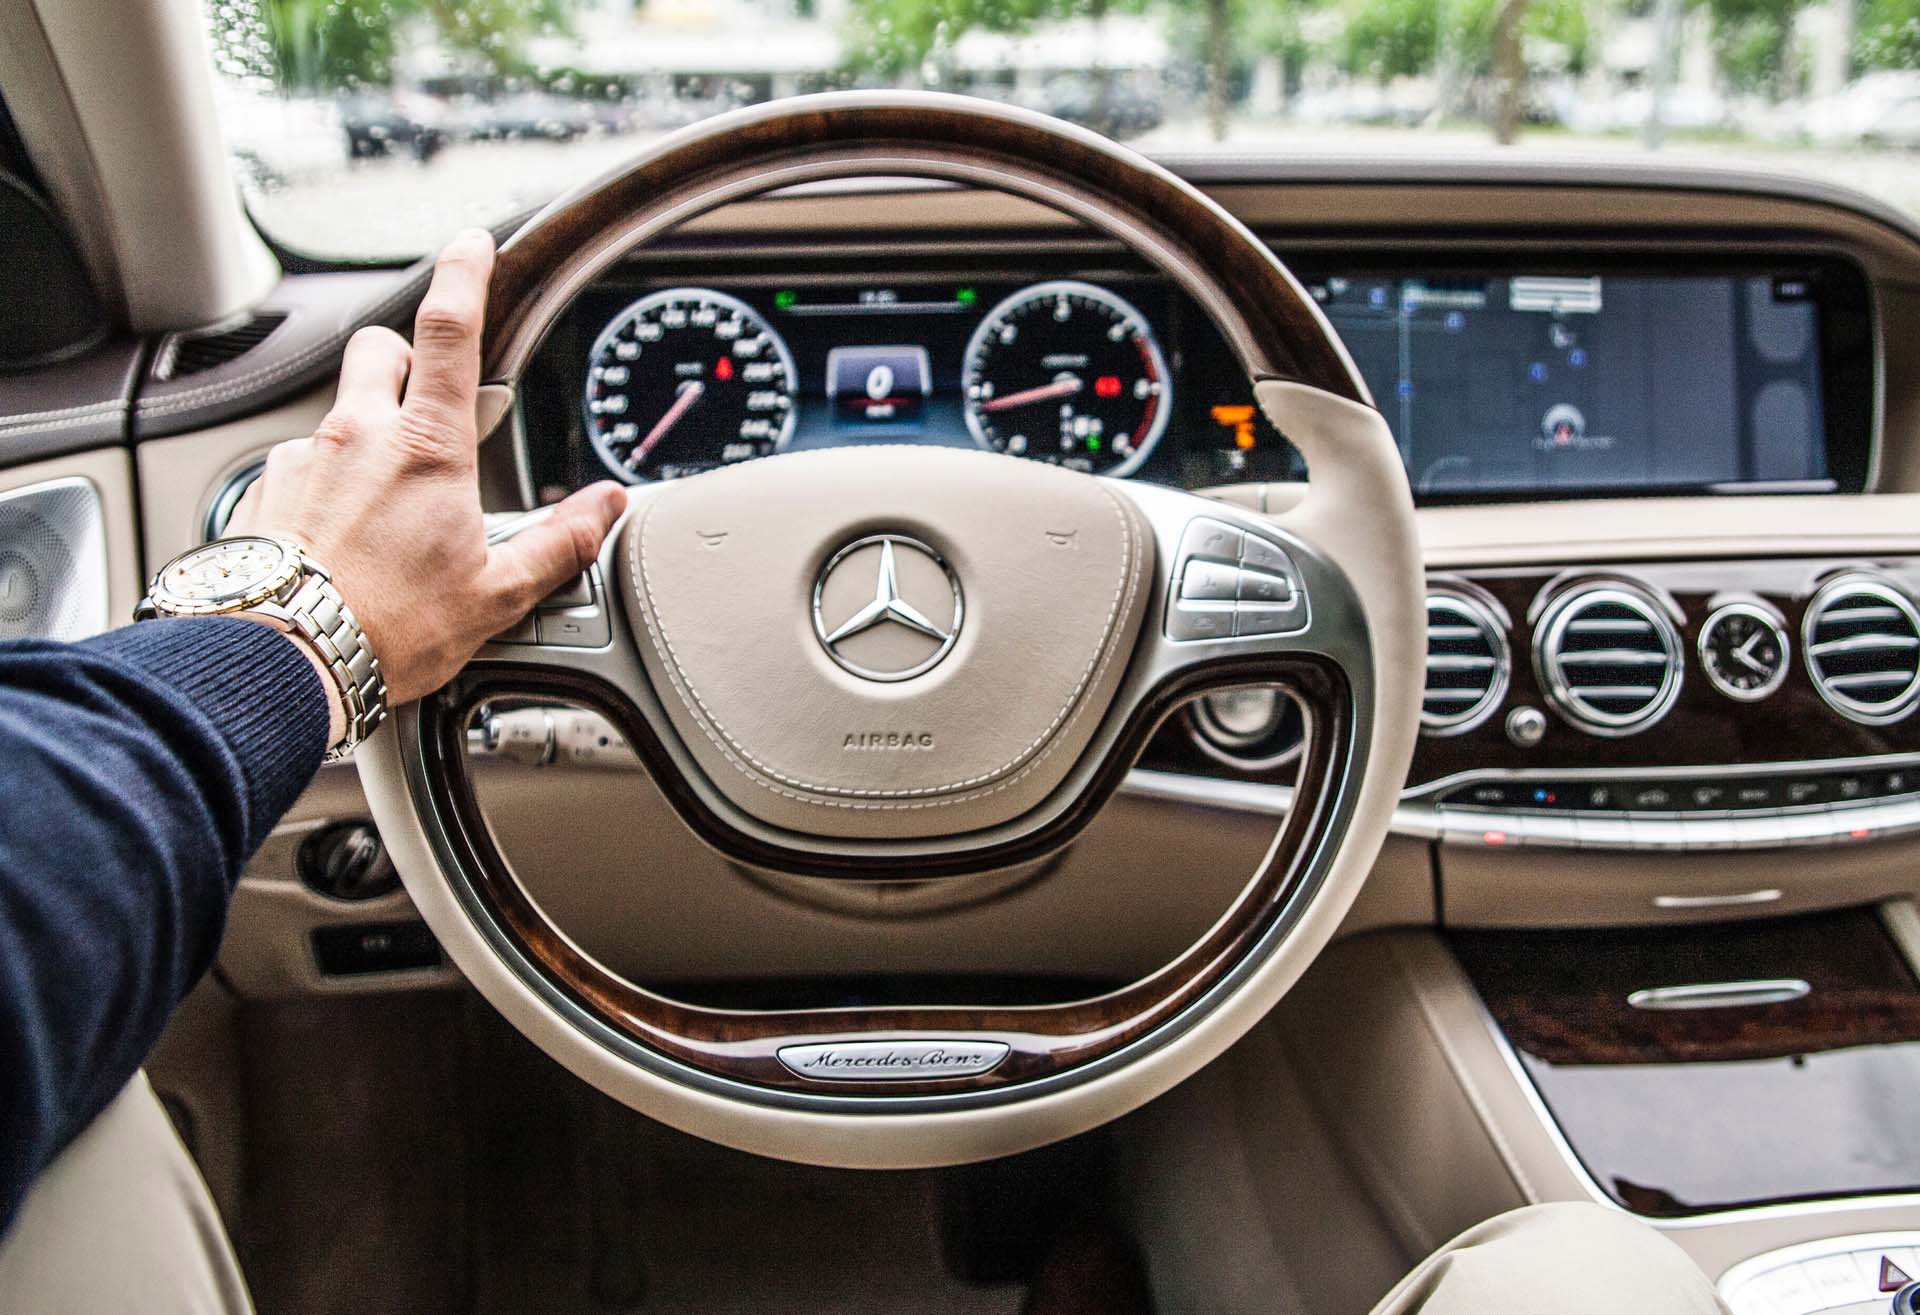 Hand on a Mercedes Benz steering wheel